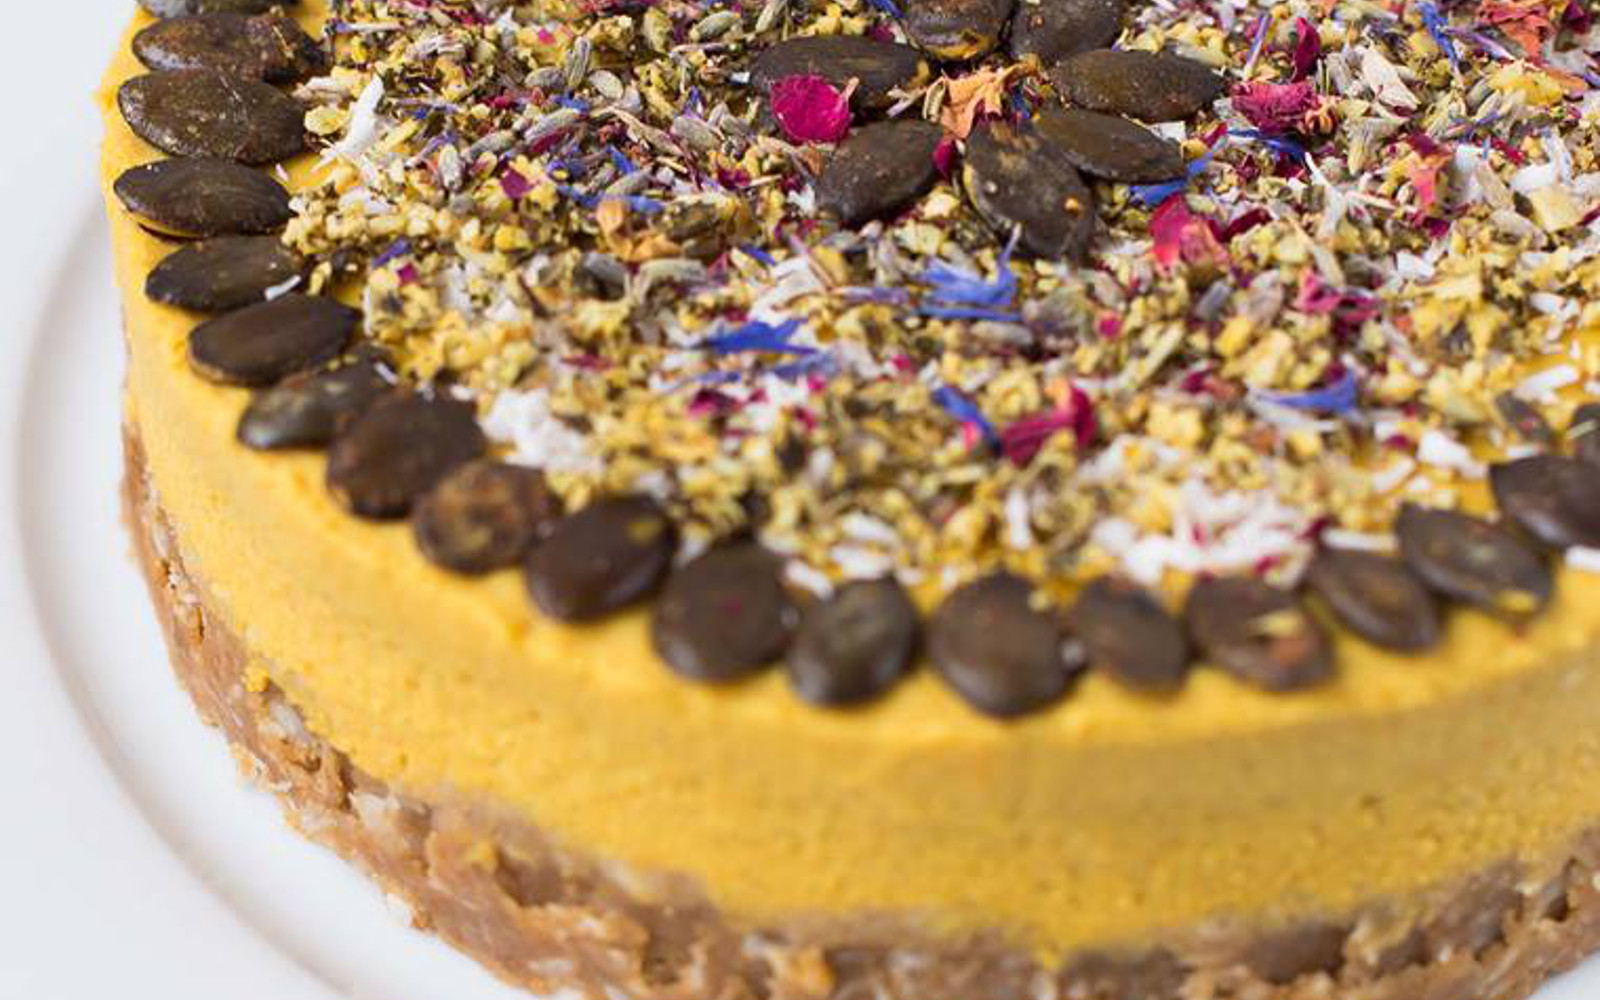 Vegan Golden Milk Pie with sweet potatoes with colorful toppings